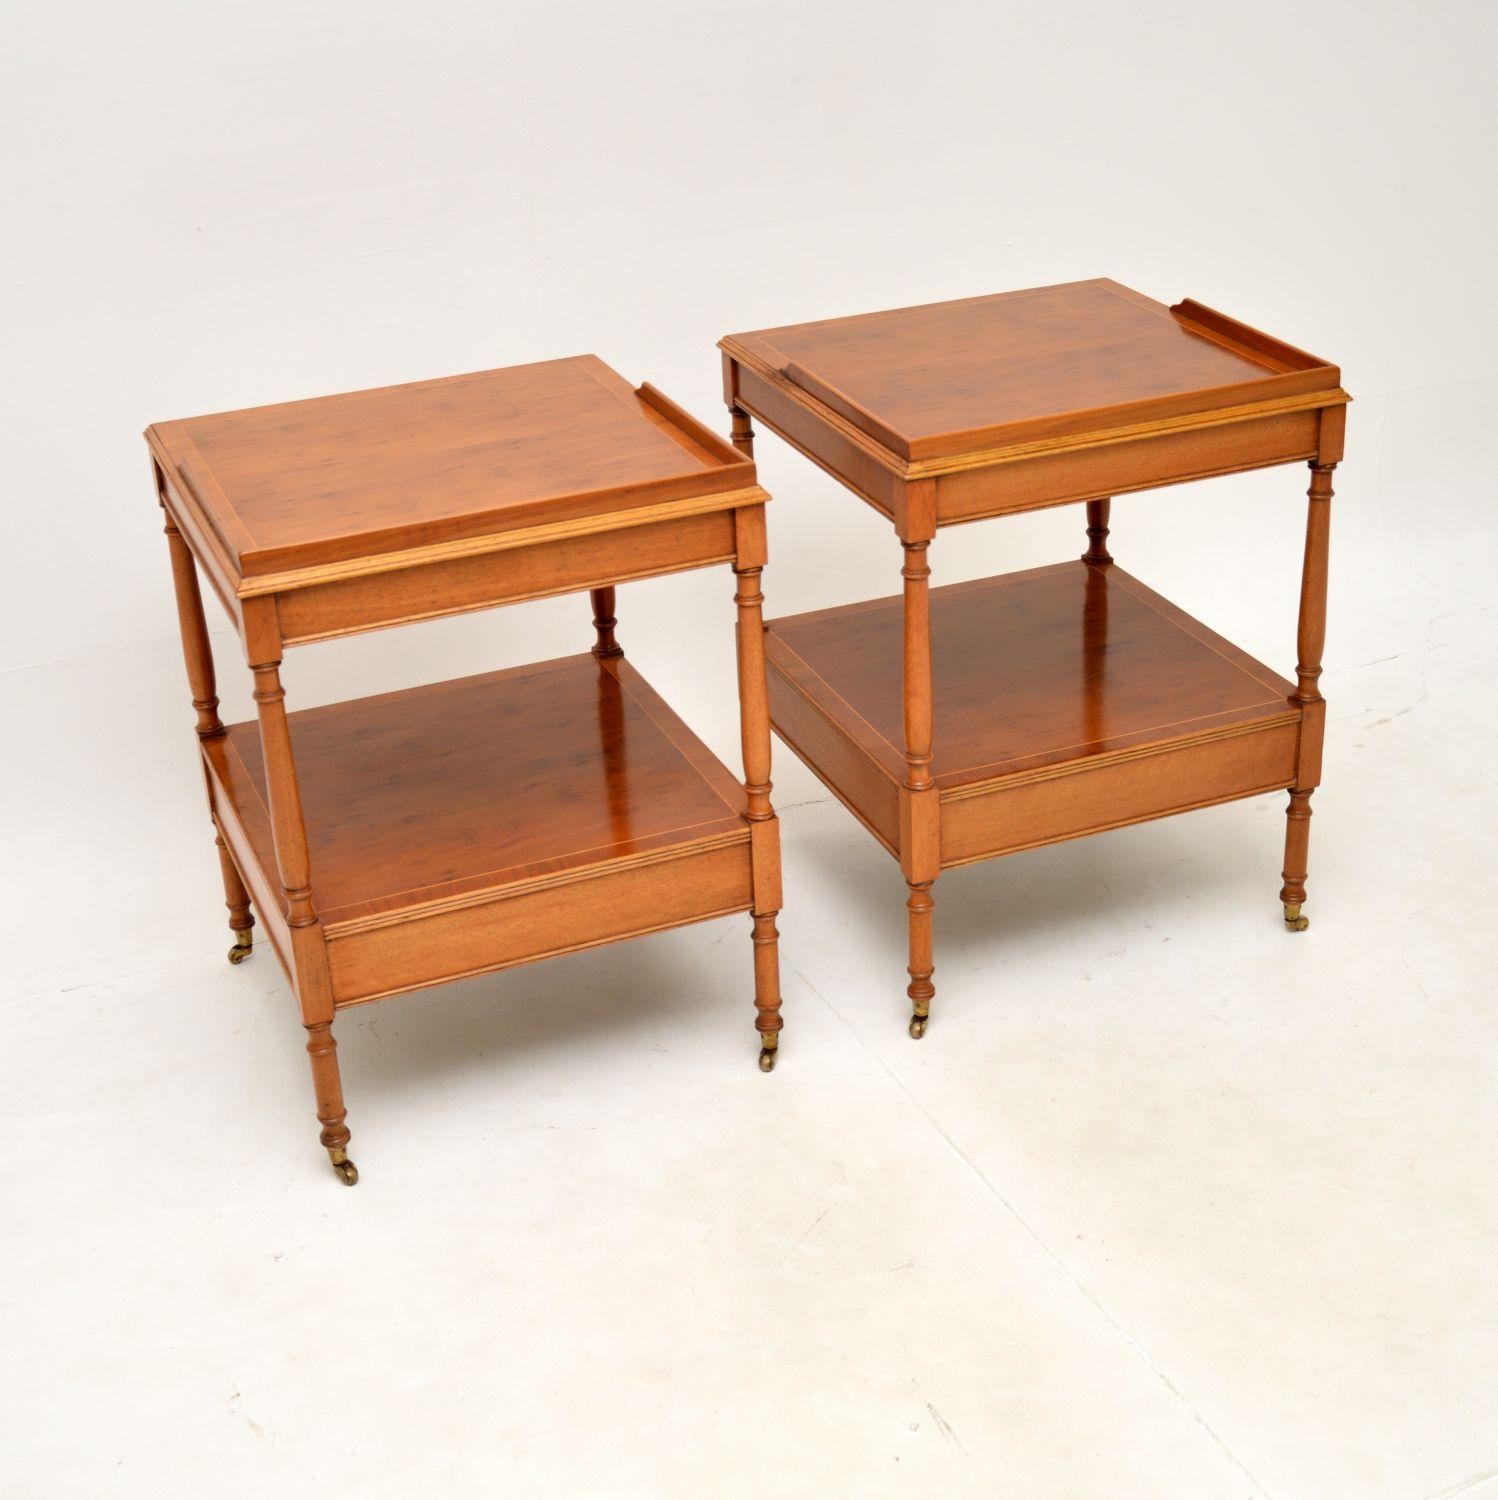 Mid-20th Century Pair of Antique Georgian Style Side Tables in Yew Wood